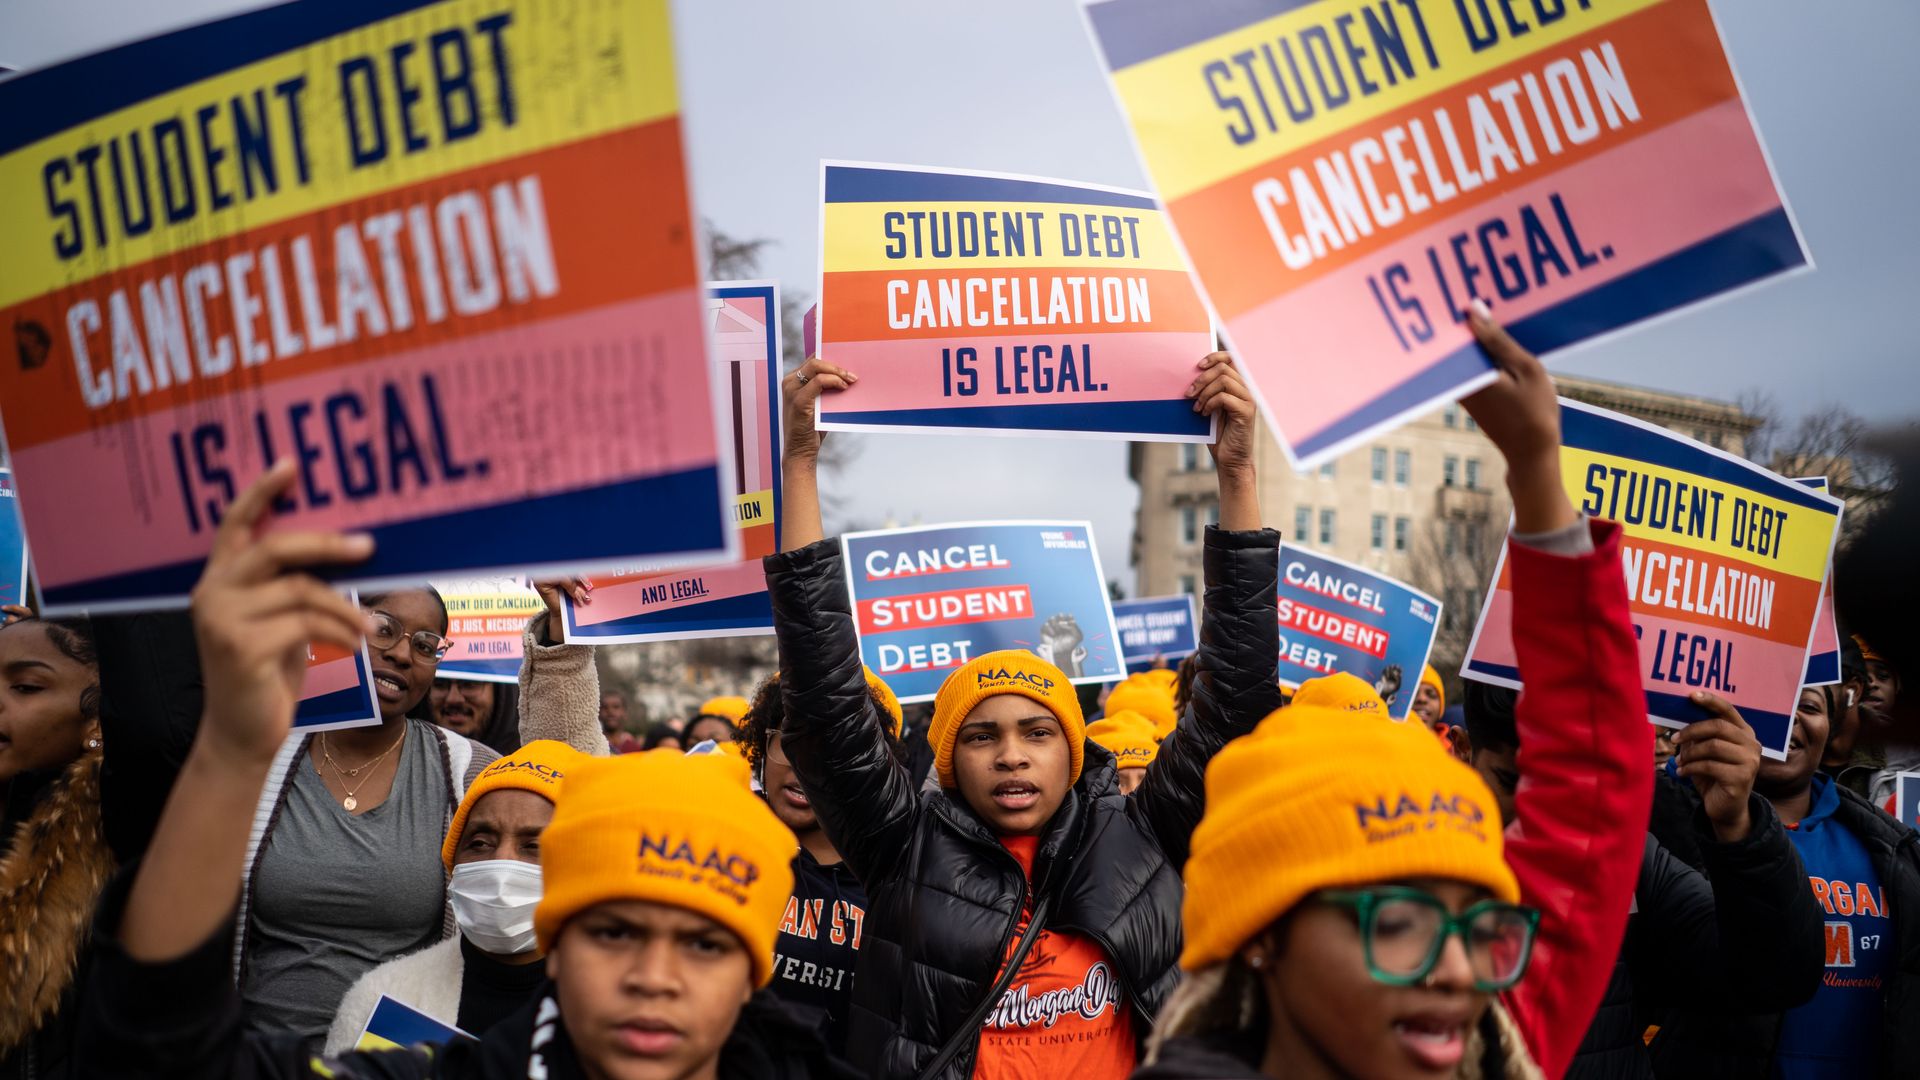 People rally to show support for the Biden administrationâs student debt relief plan in front of the Supreme Court on Feb. 28 in Washington, D.C